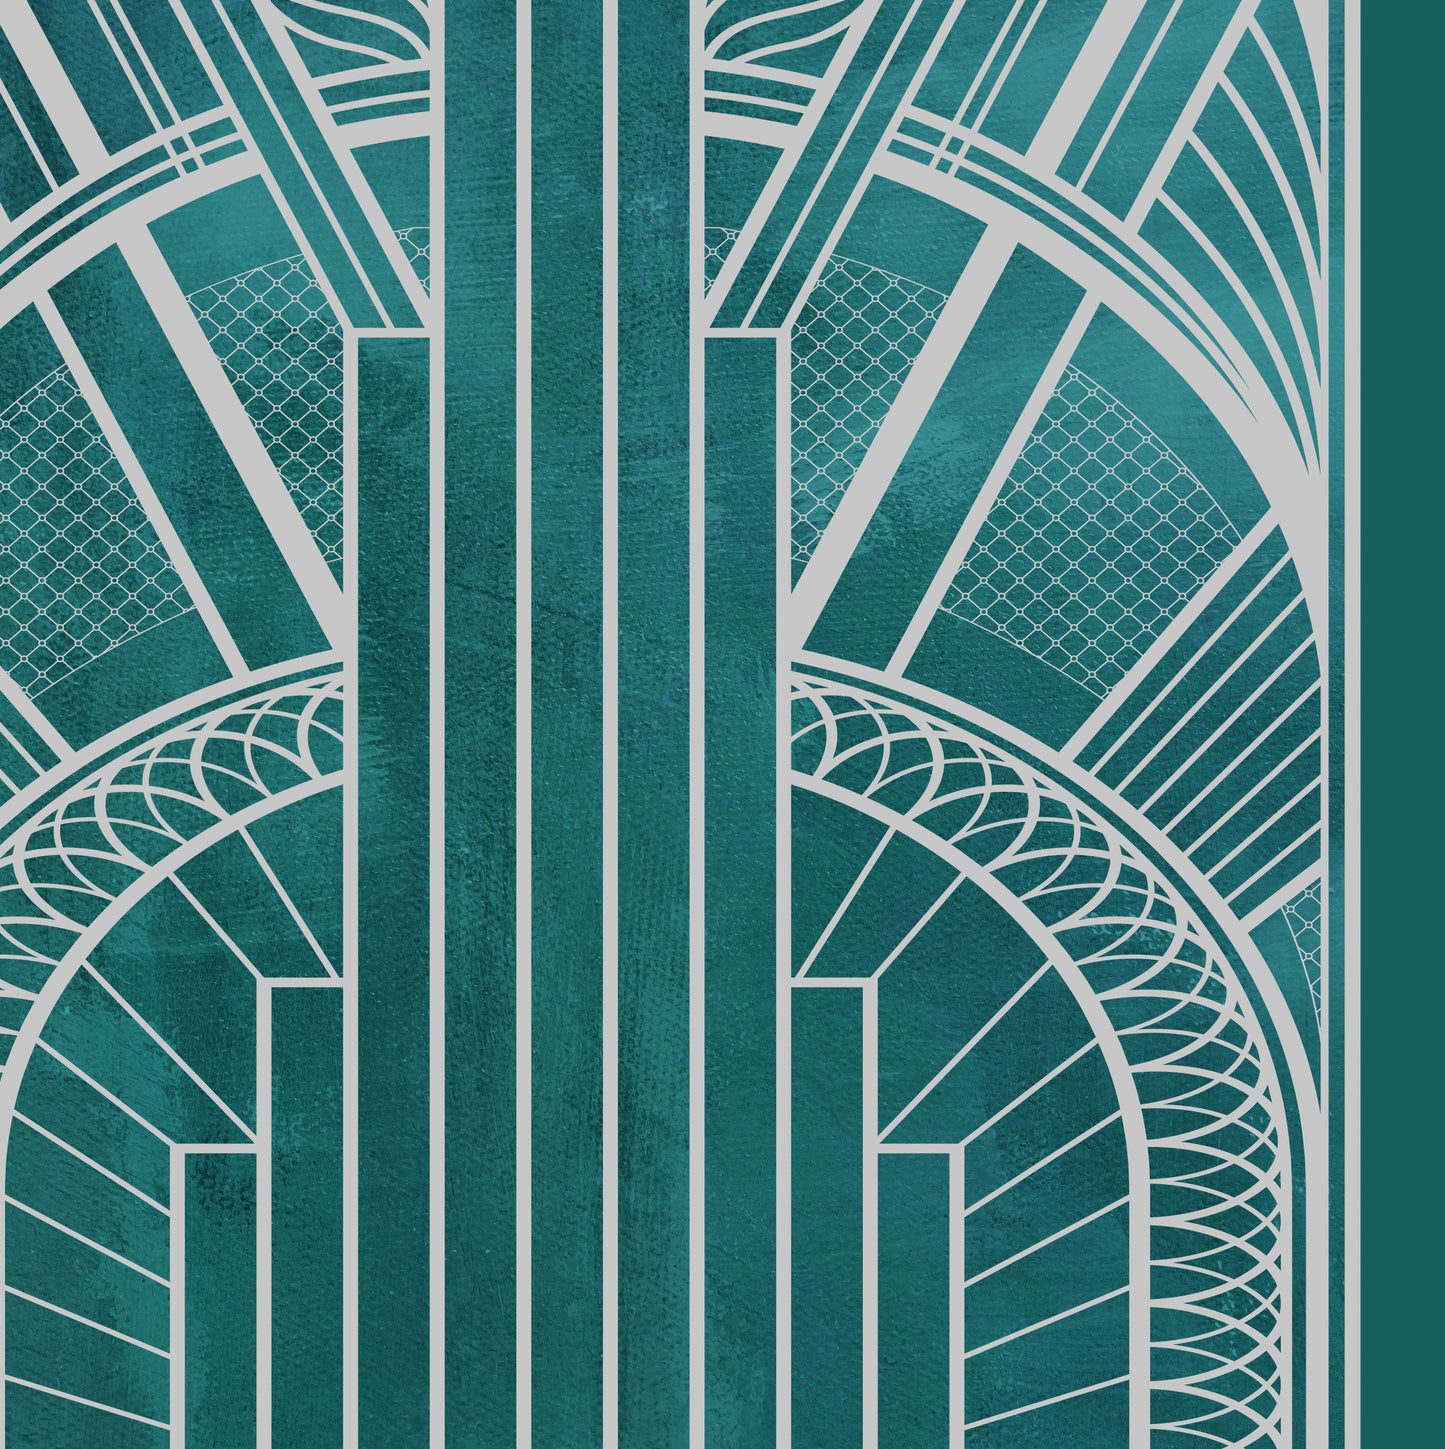 Close up showing detail of art deco print in teal and silver